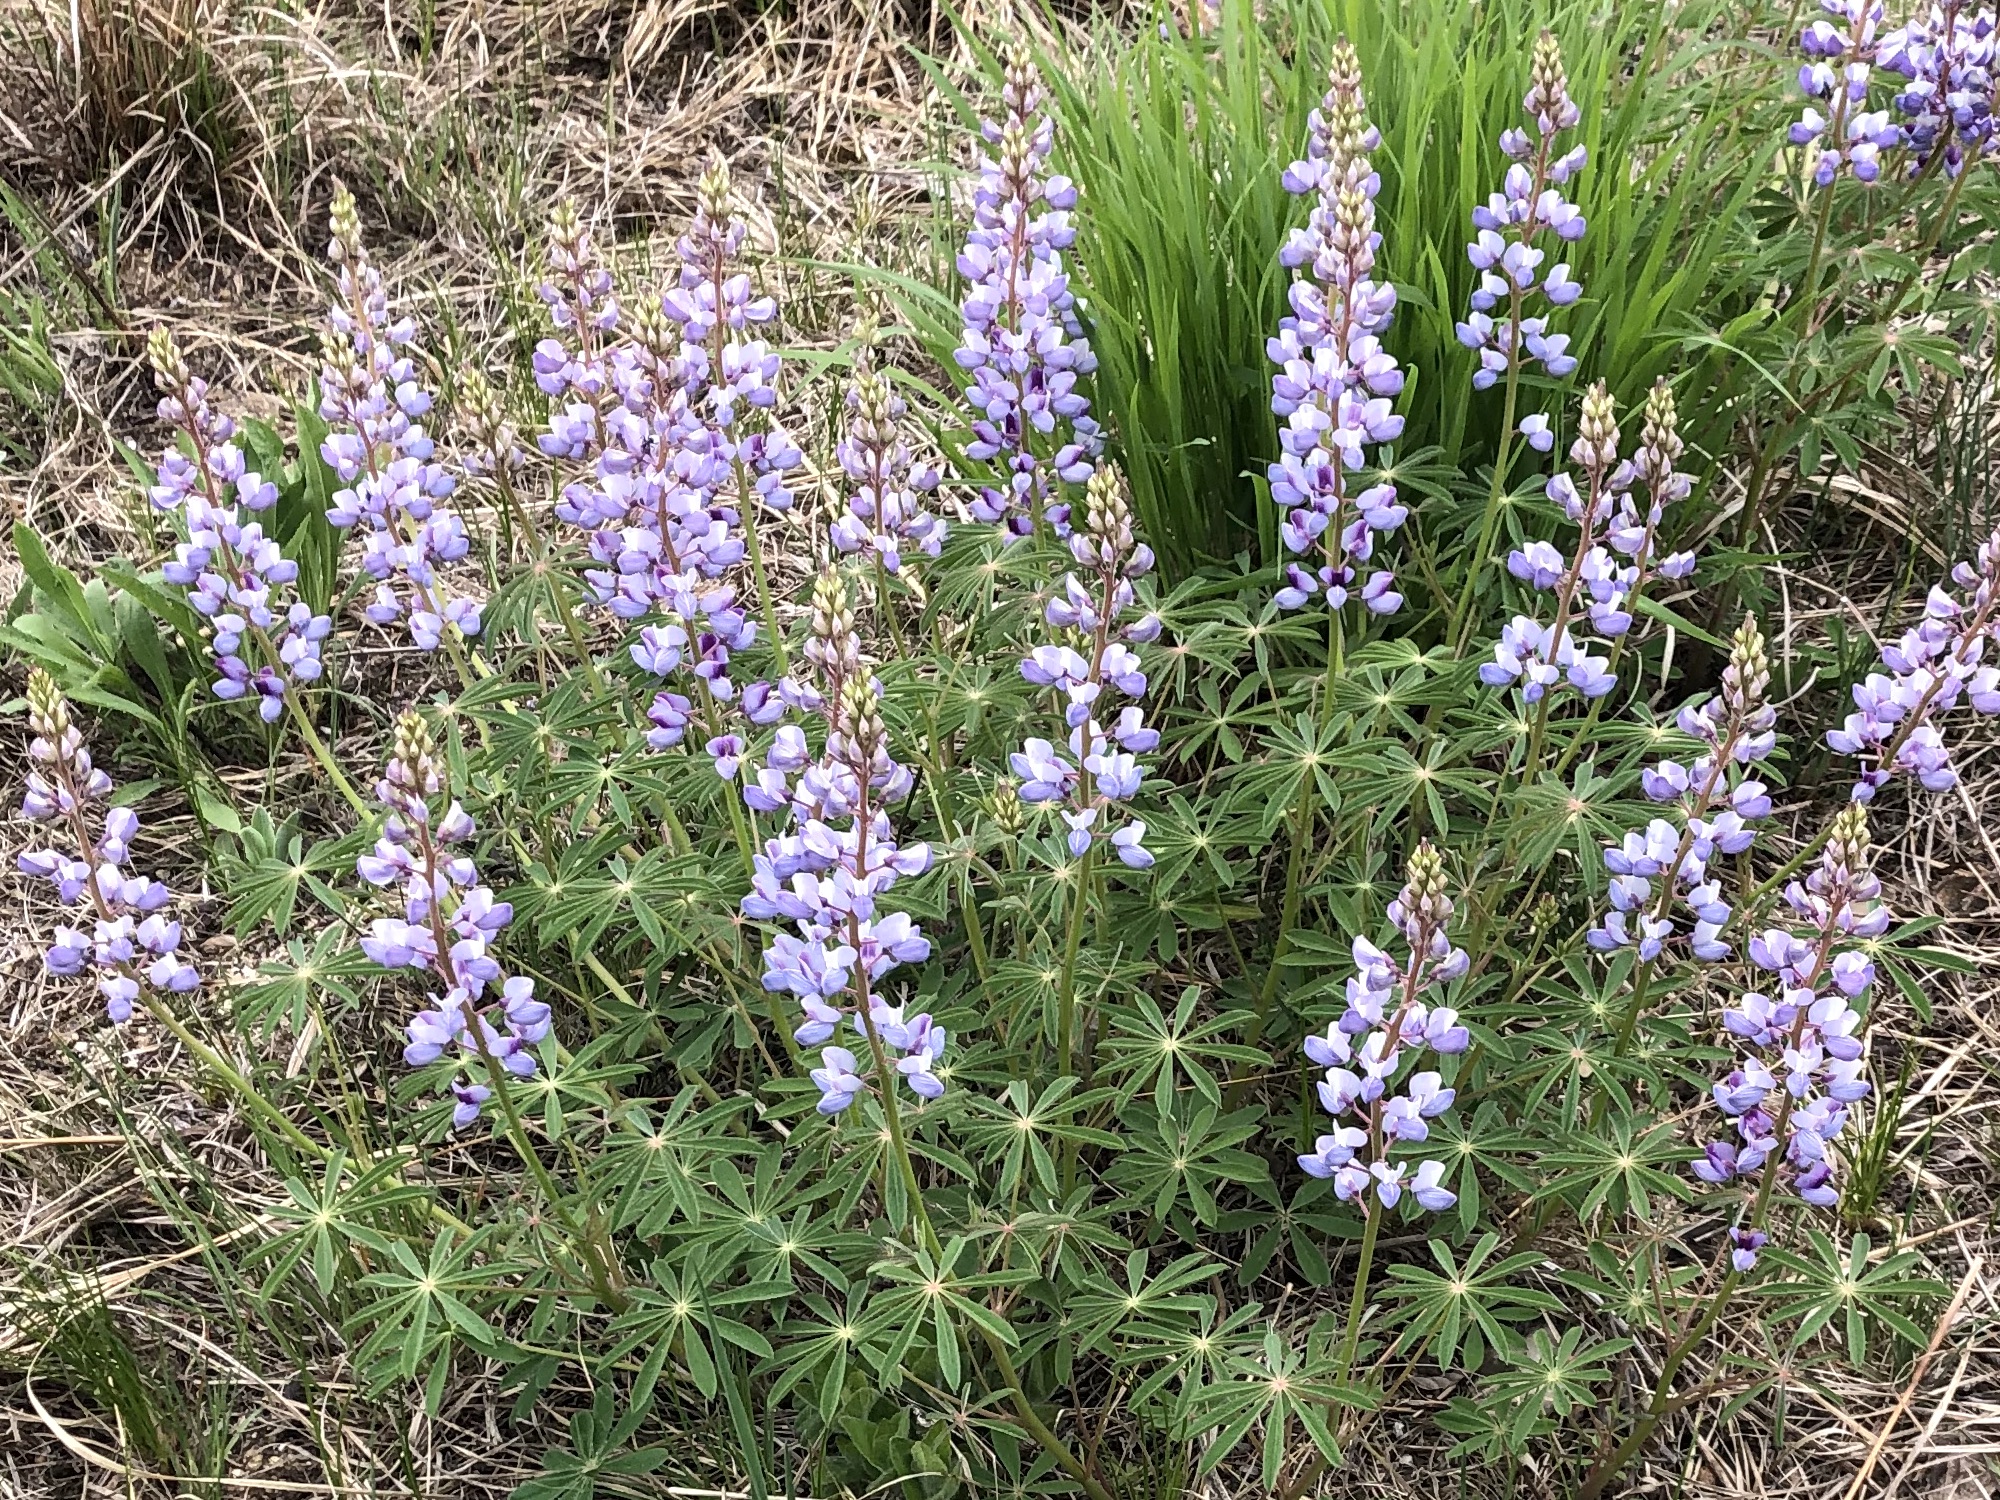 Wild Lupine next to the UW-Madison Arboretum Visitor Center in Madison, Wisconsin on May 17, 2022.